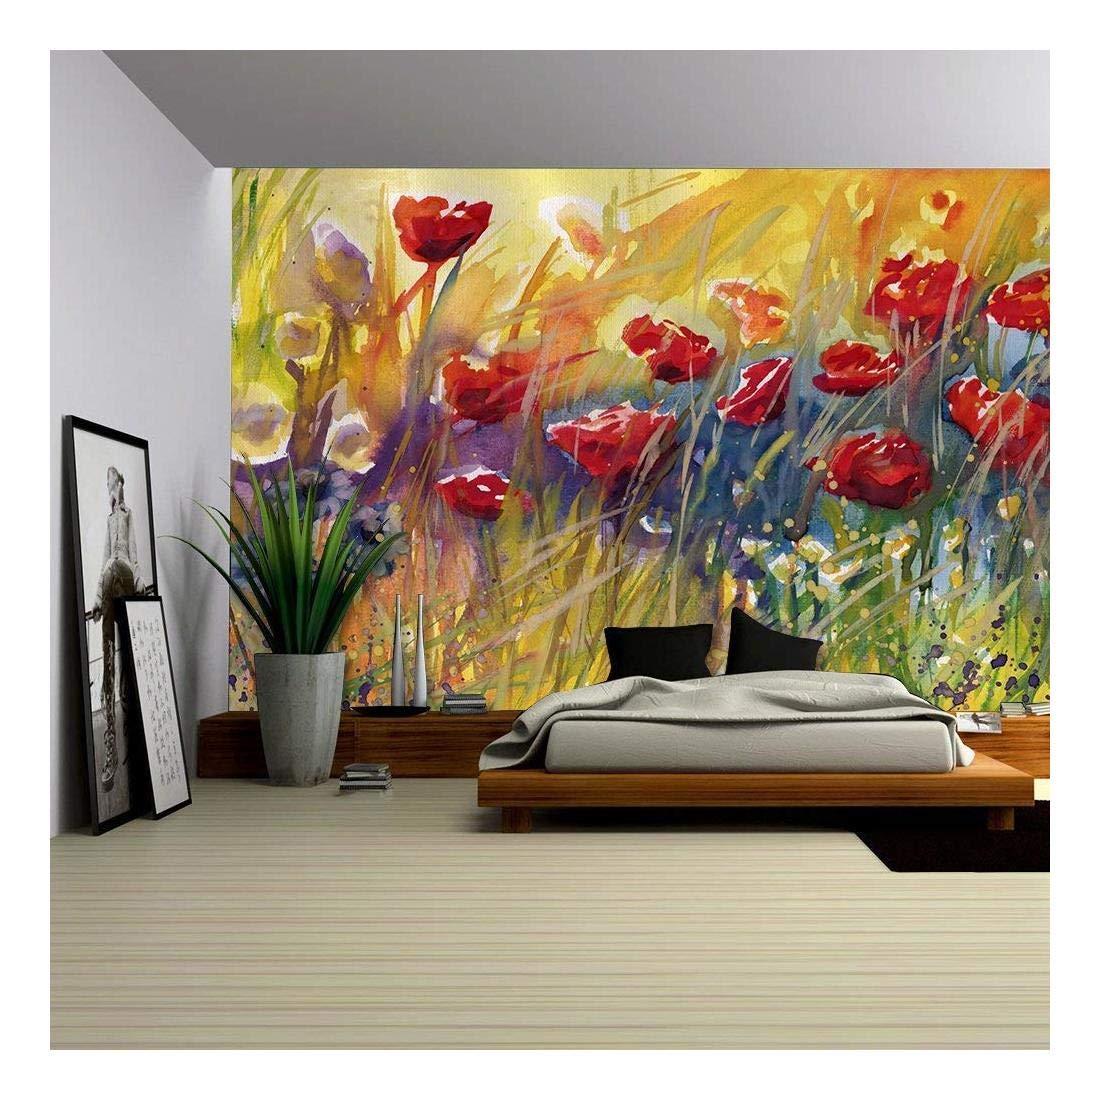 1100 x 1100 · jpeg - wall26 - Poppies, Flowers, - Removable Wall Mural | Self-adhesive Large ...